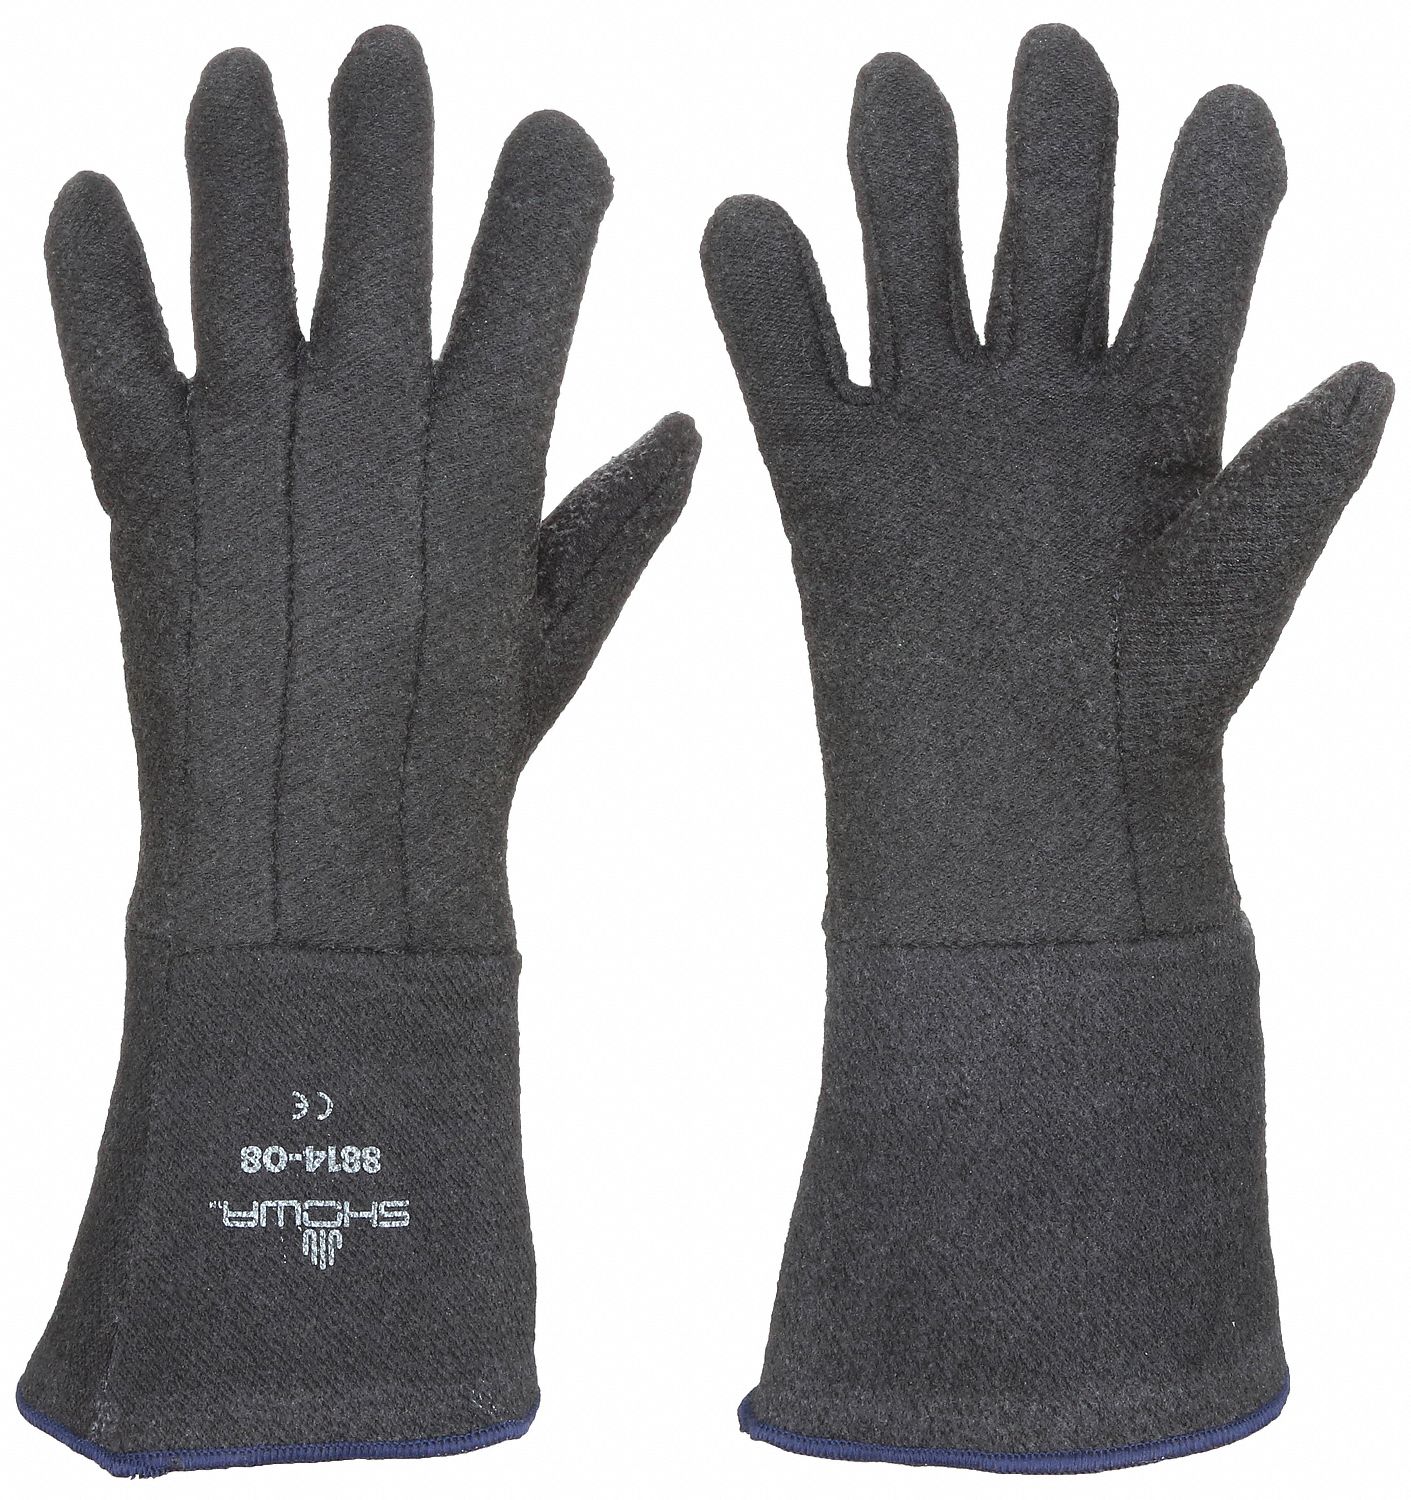 COATED GLOVES, L (9), GLOVE HAND PROTECTION, ROUGH, NEOPRENE 500 ° F MAX